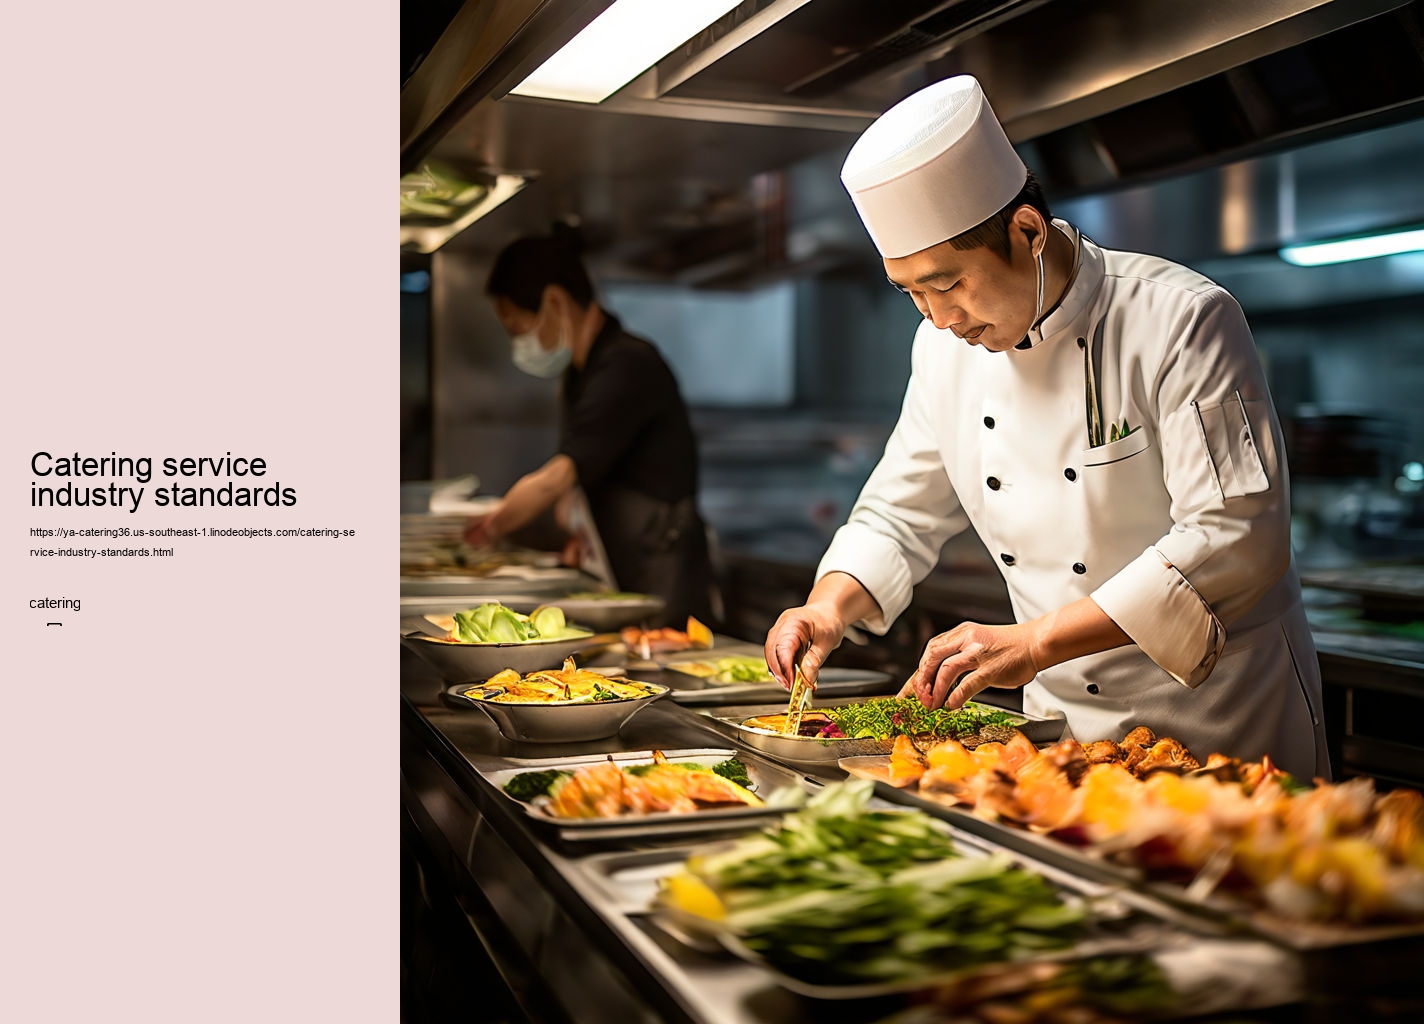 Catering service industry standards